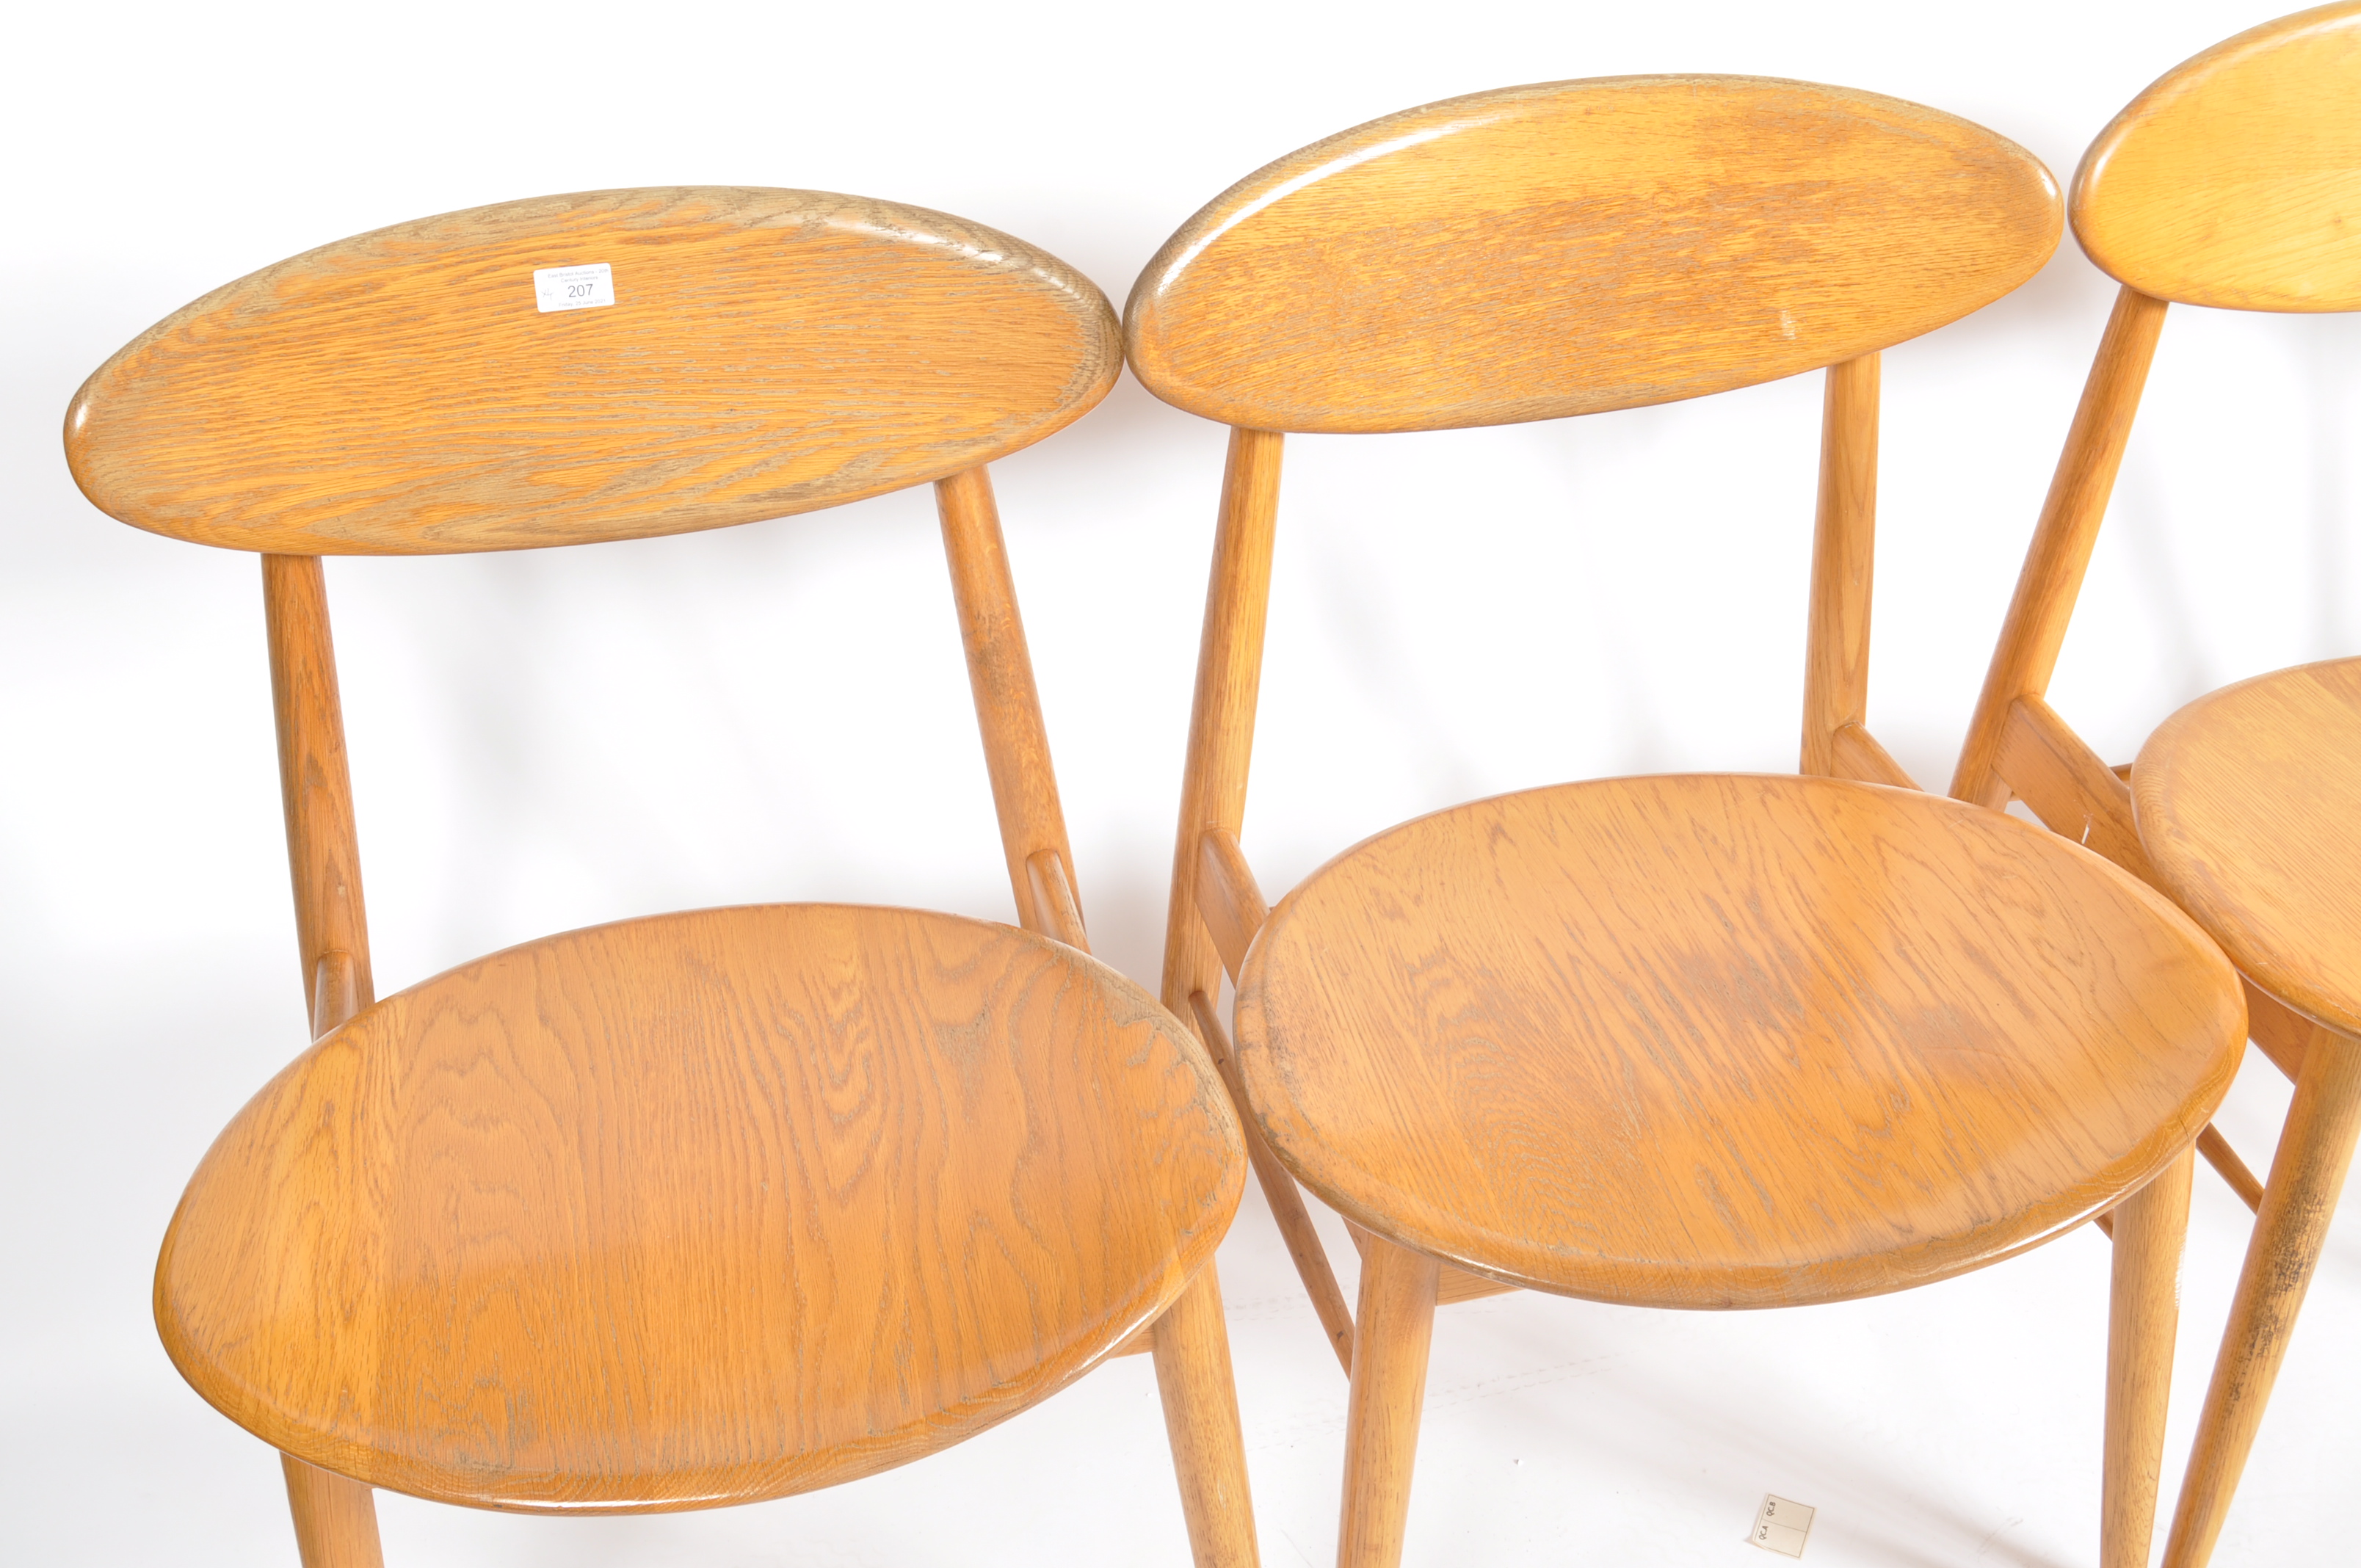 SET OF FOUR RETRO ELM DINING CHAIRS / SIDE CHAIRS - Image 3 of 8